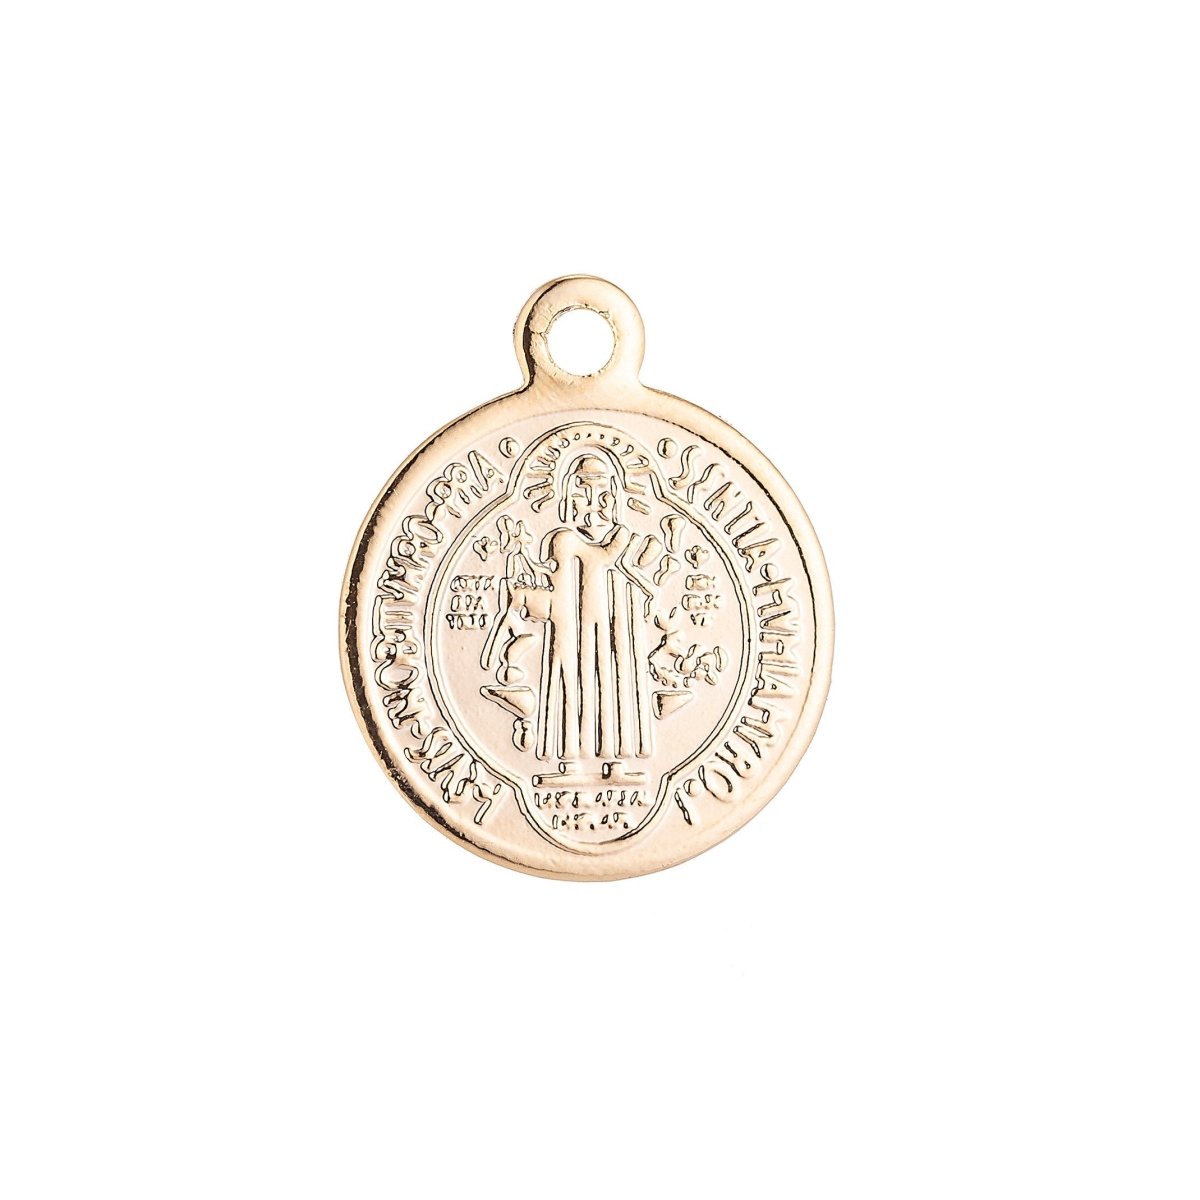 Vintage Christian Religious Charm Gold filled Pendant Protection Beads Antique Coin Medallion for Necklace Earring Jewelry Making Supply C-063 - DLUXCA